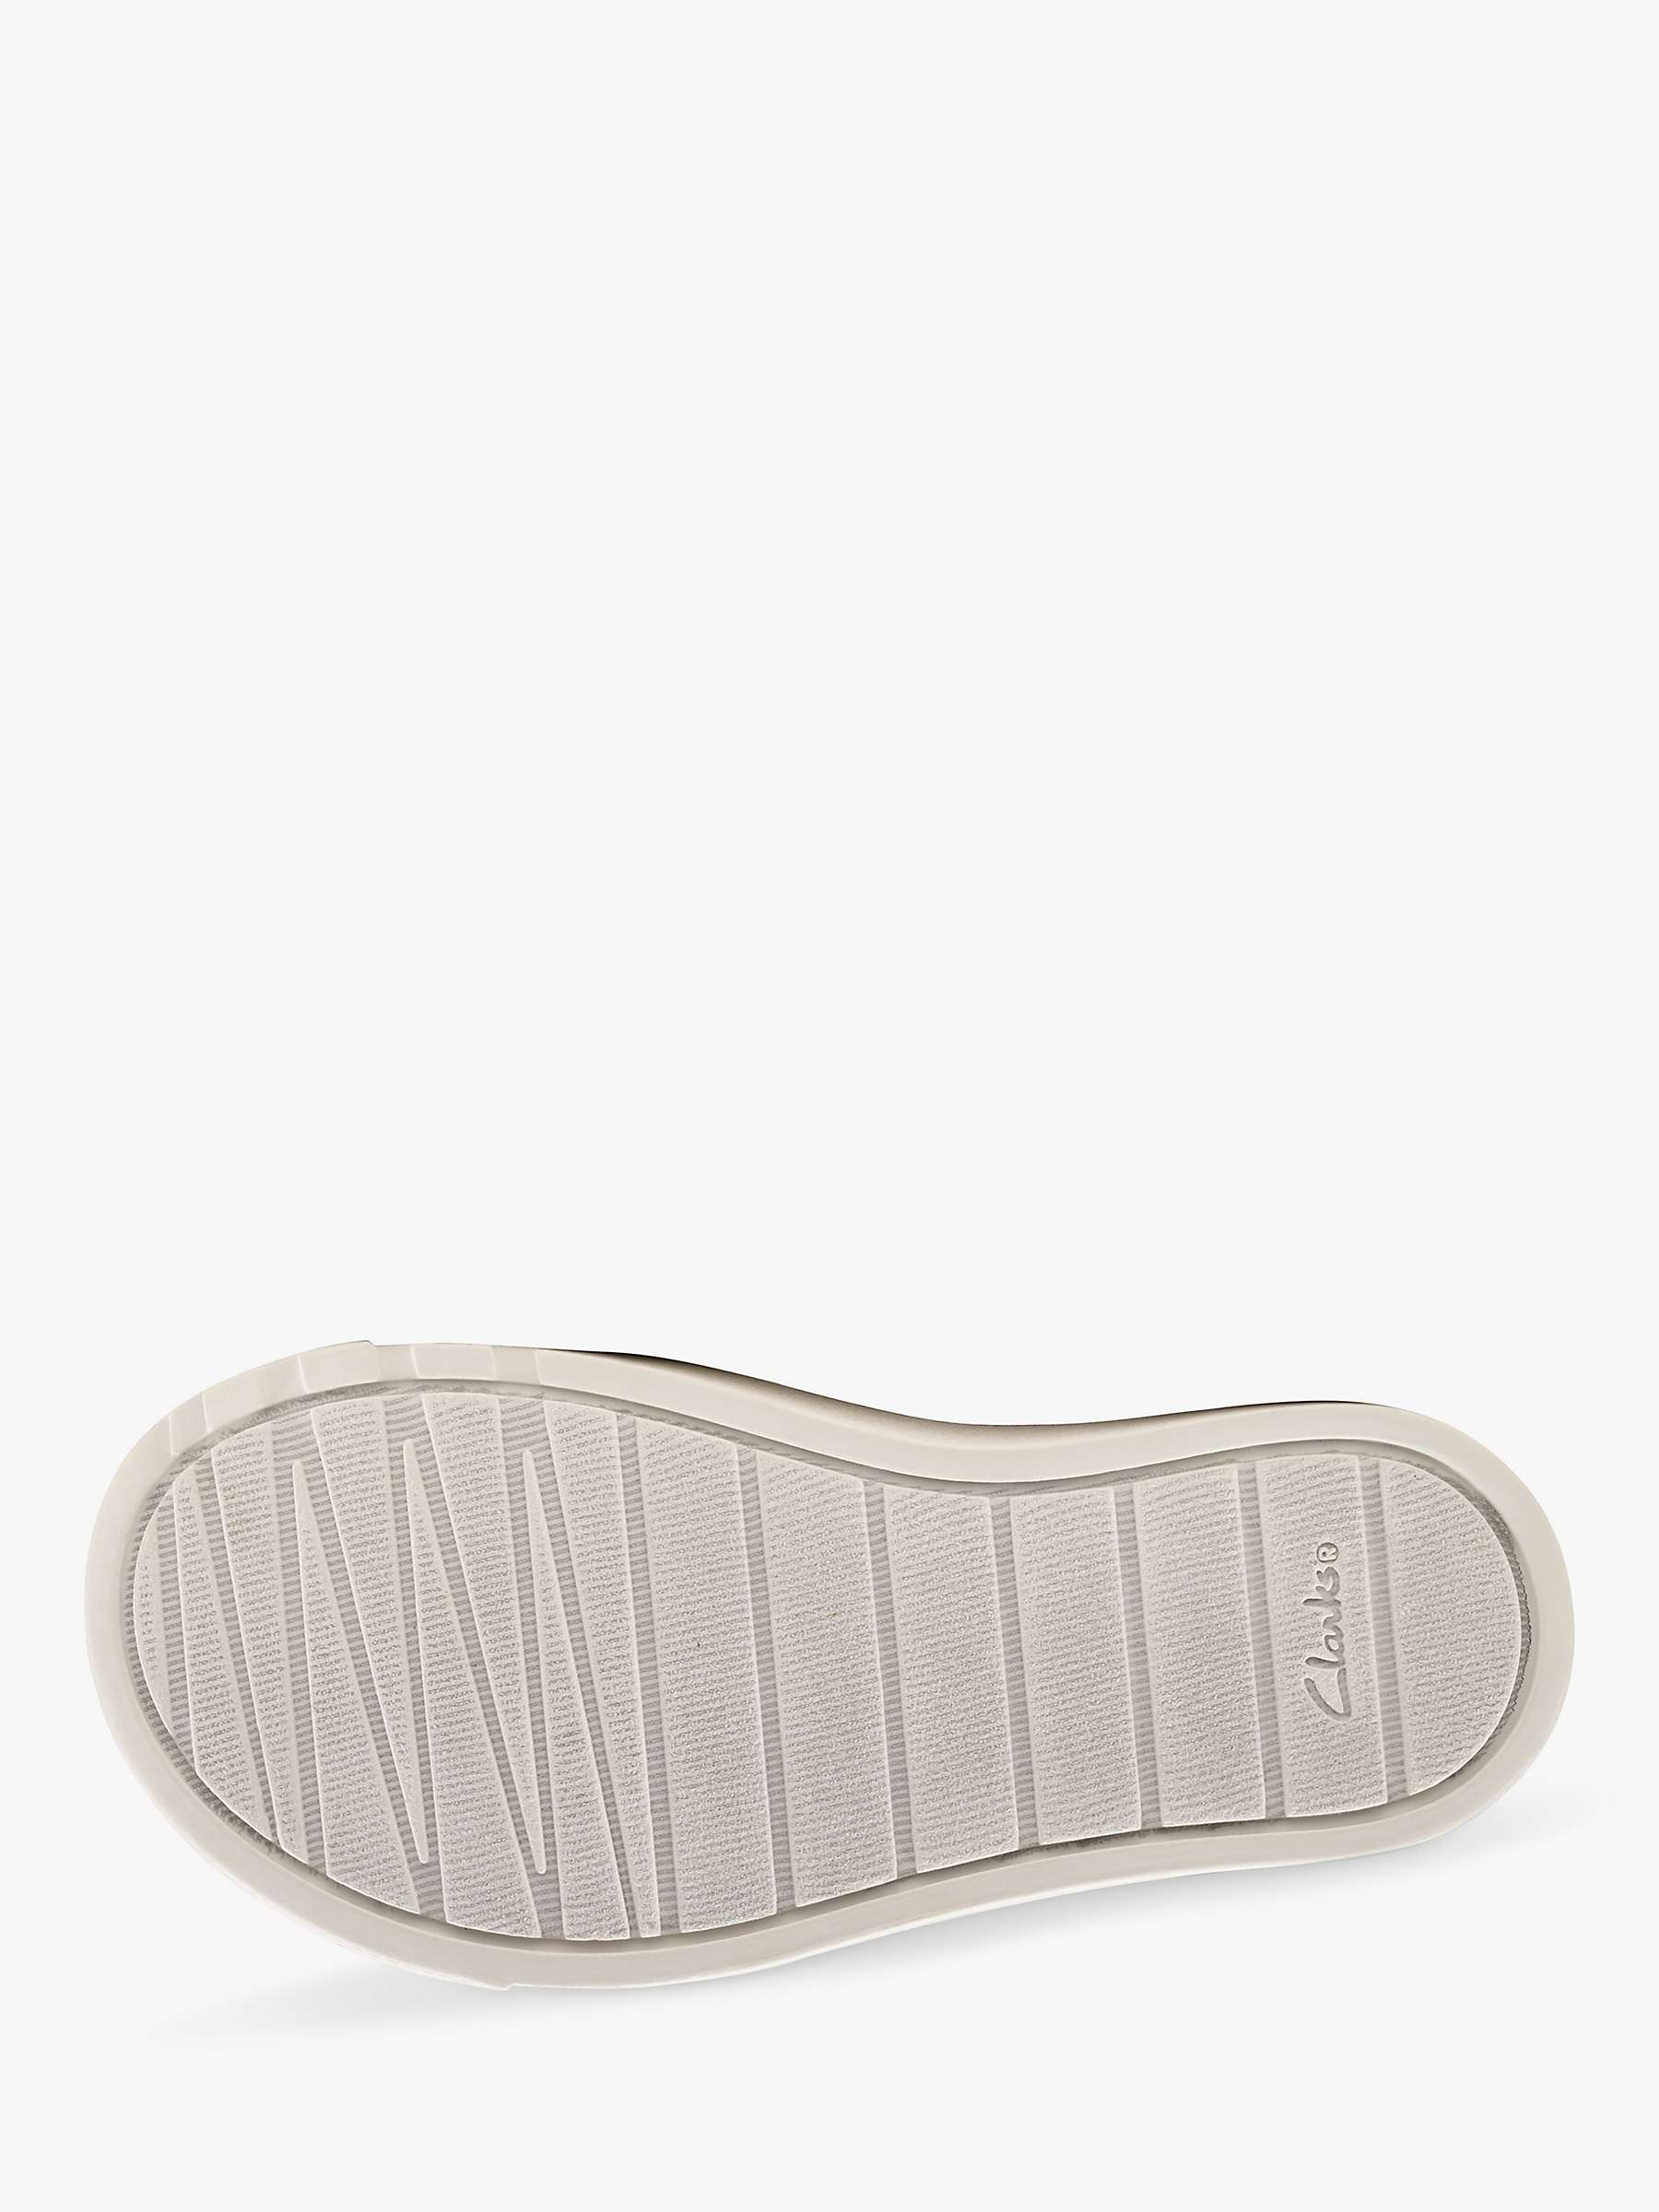 Buy Clarks Kids' City Bright Riptape Trainers Online at johnlewis.com